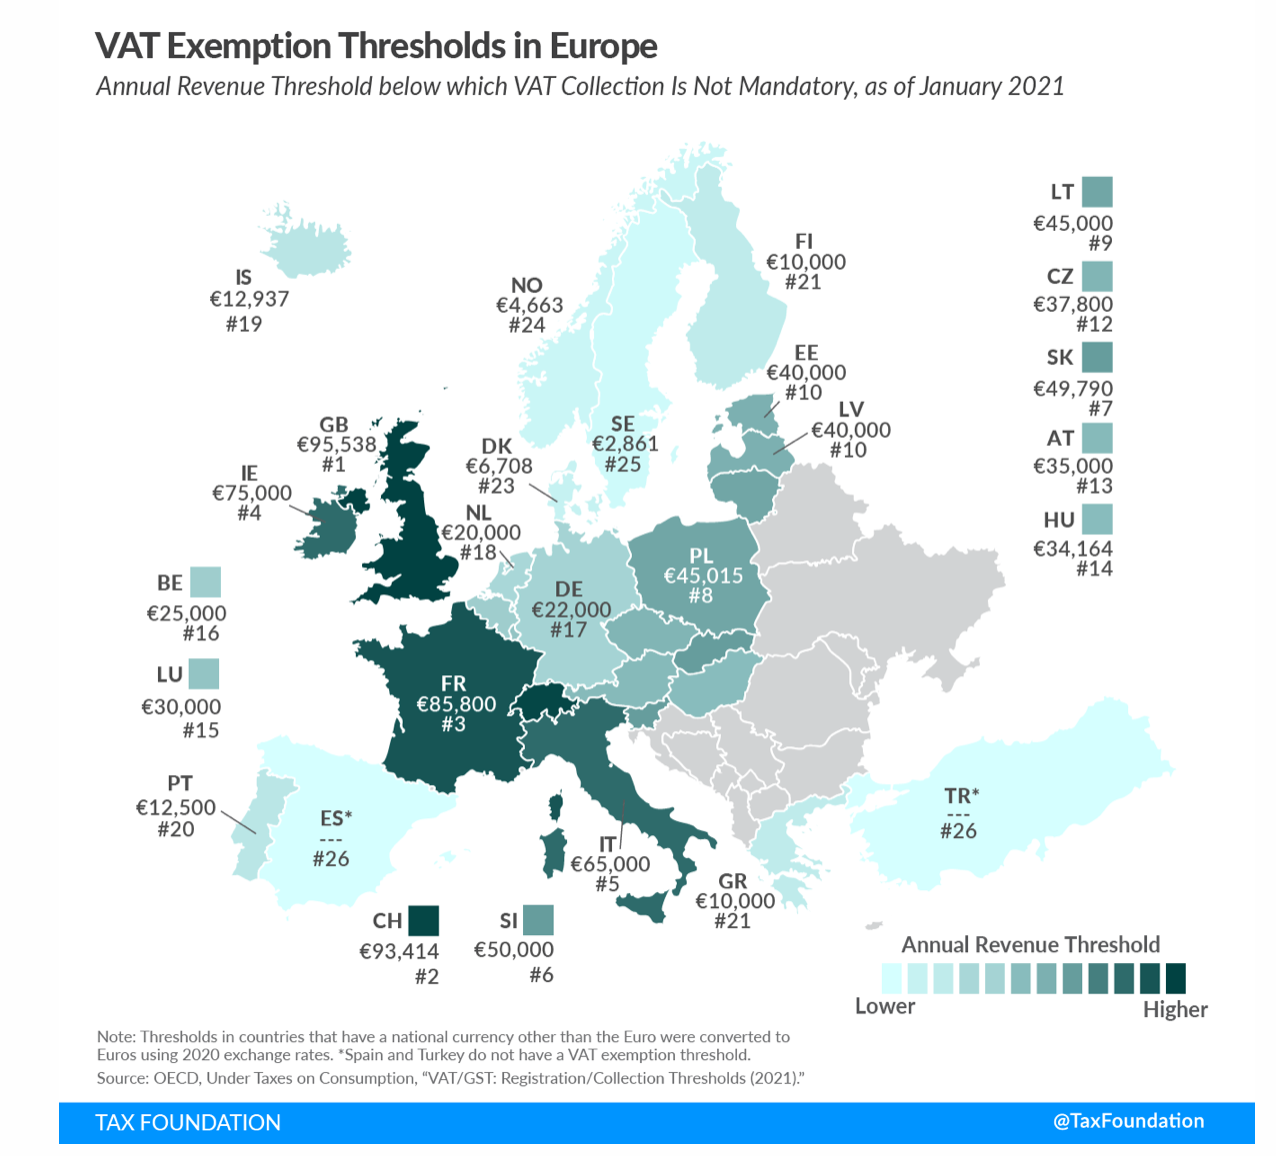 Complete Guide to EU VAT Invoice Requirements